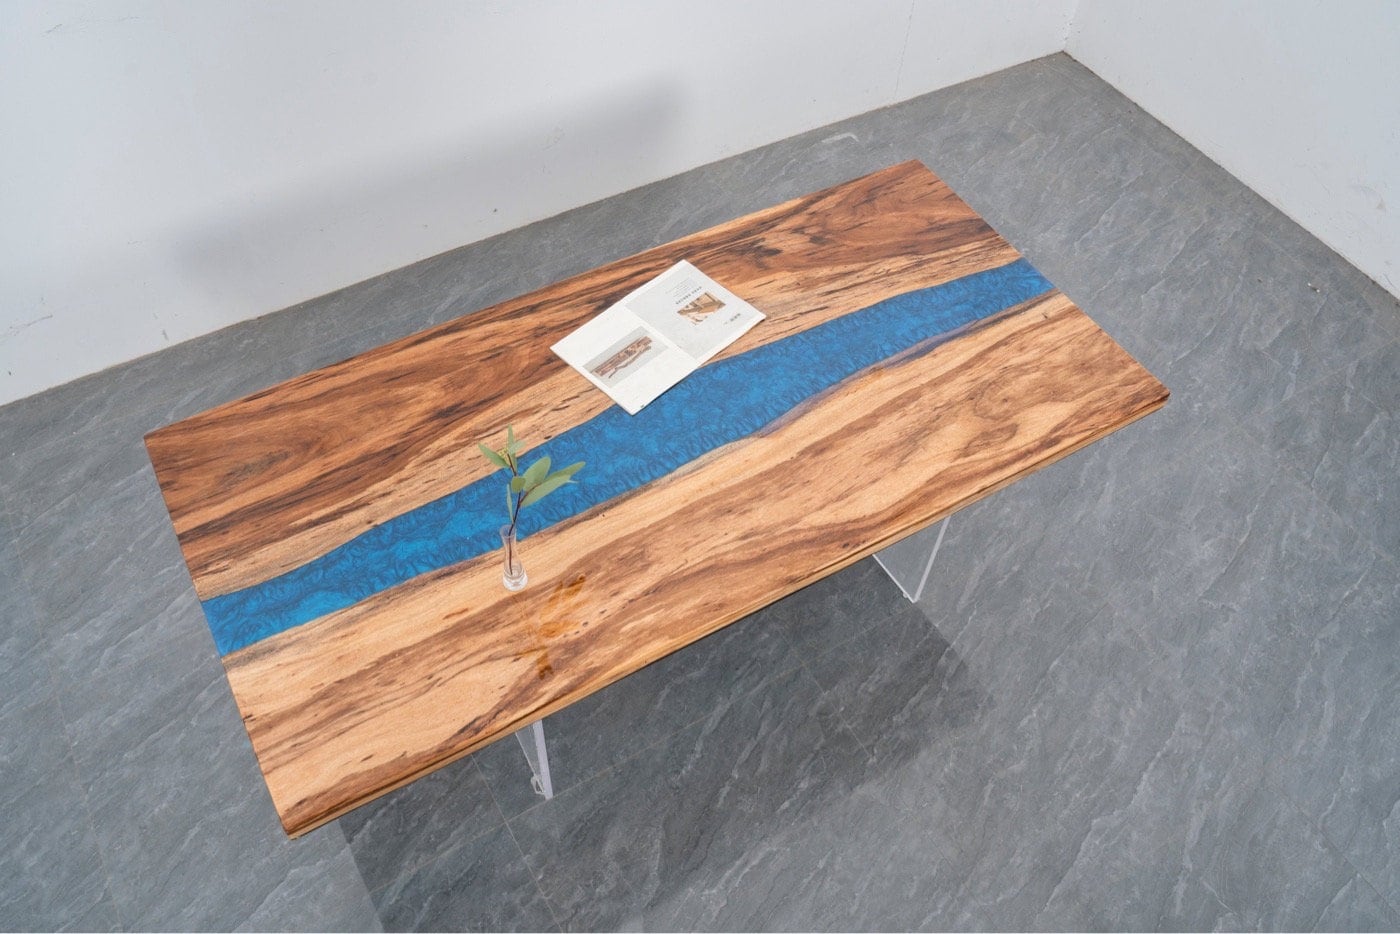 unique epoxy dining table, epoxy kitchen dining table, river Beli noir wood epoxy table, natural Wood epoxy table